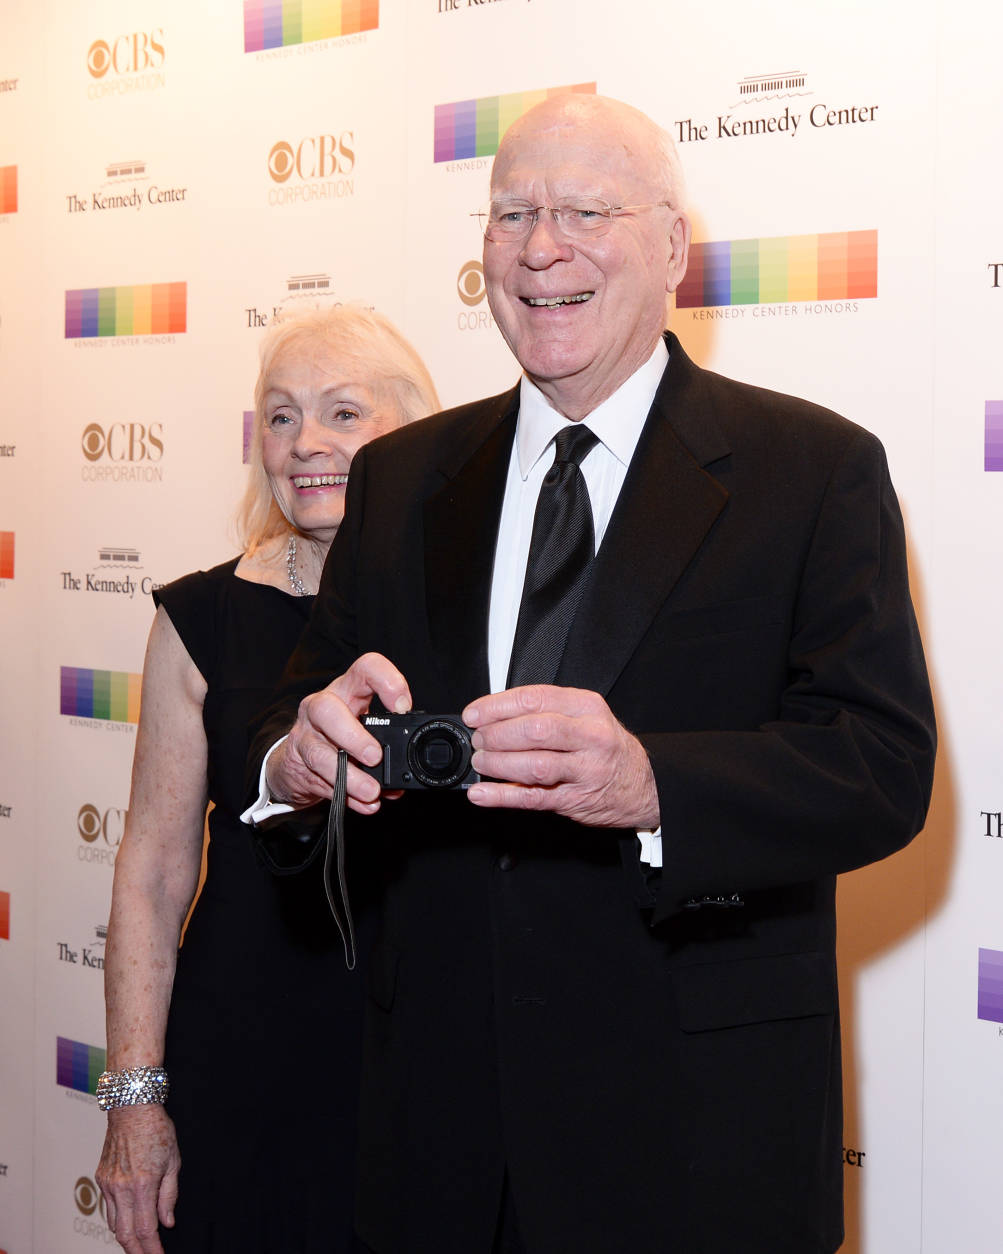 U.S. Sen. Patrick Leahy (D-Vt.) and his wife, Marcelle Pomerleau. (Courtesy Shannon Finney, <a href="http://www.shannonfinneyphotography.com">www.shannonfinneyphotography.com</a>)